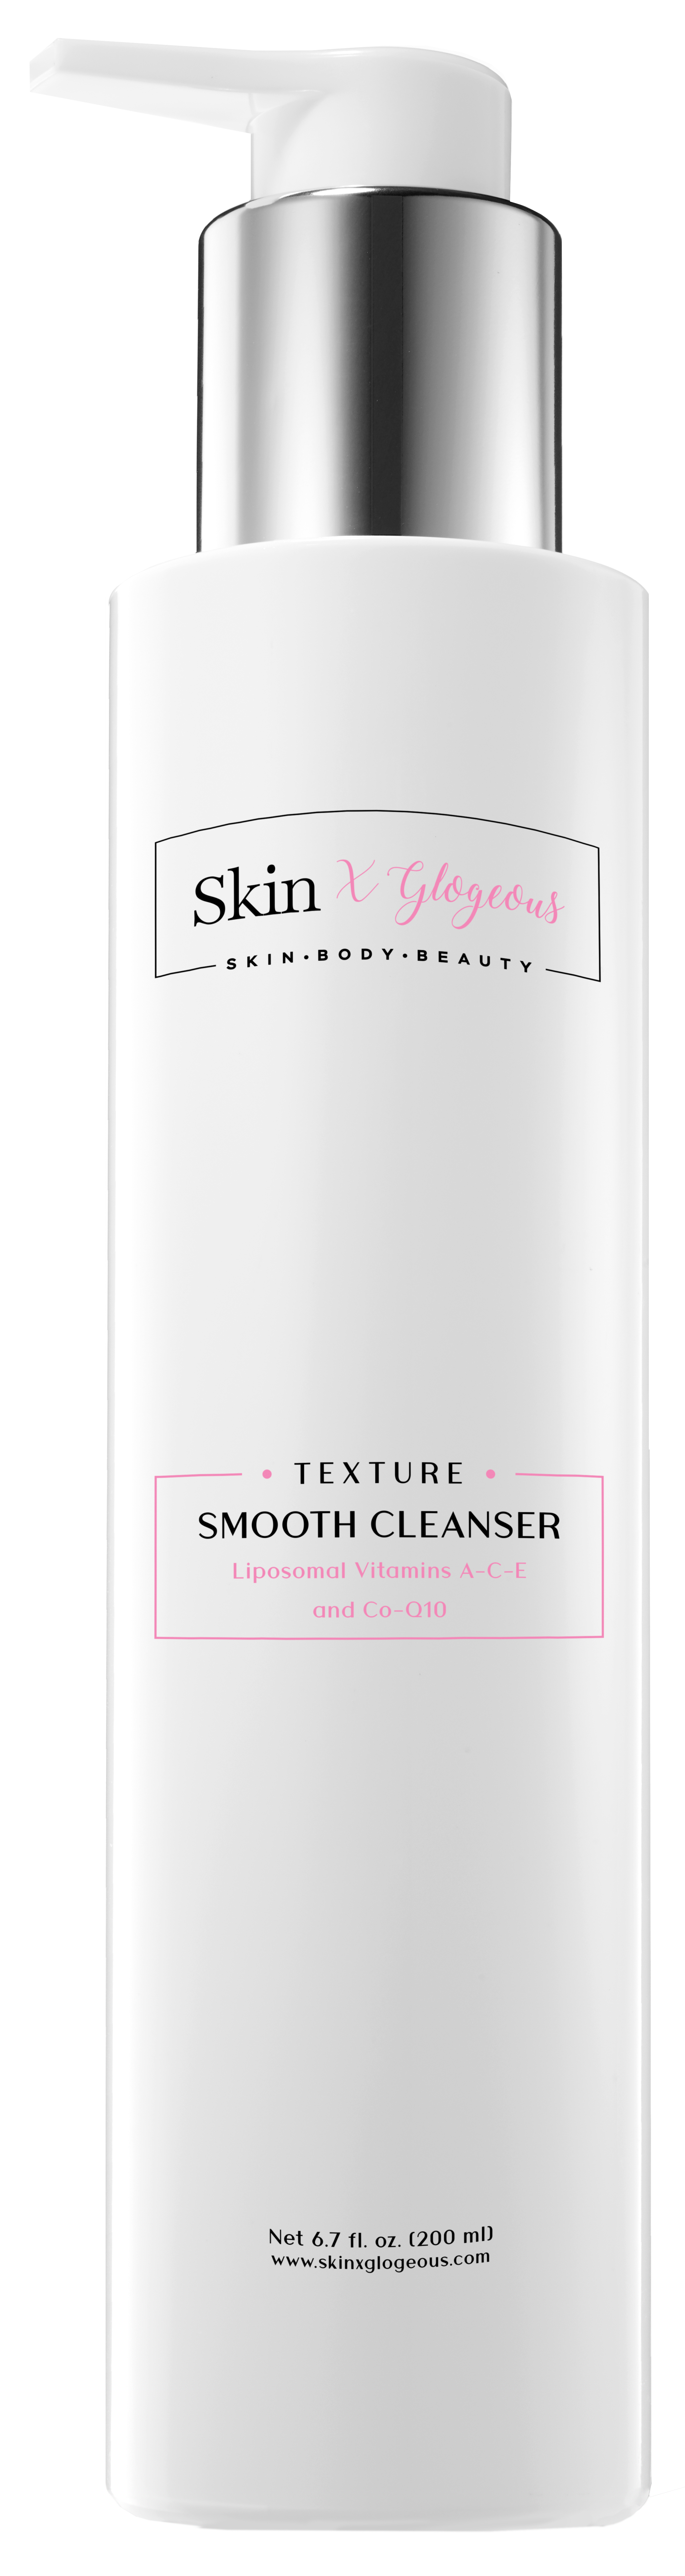 Texture Smooth Cleanser